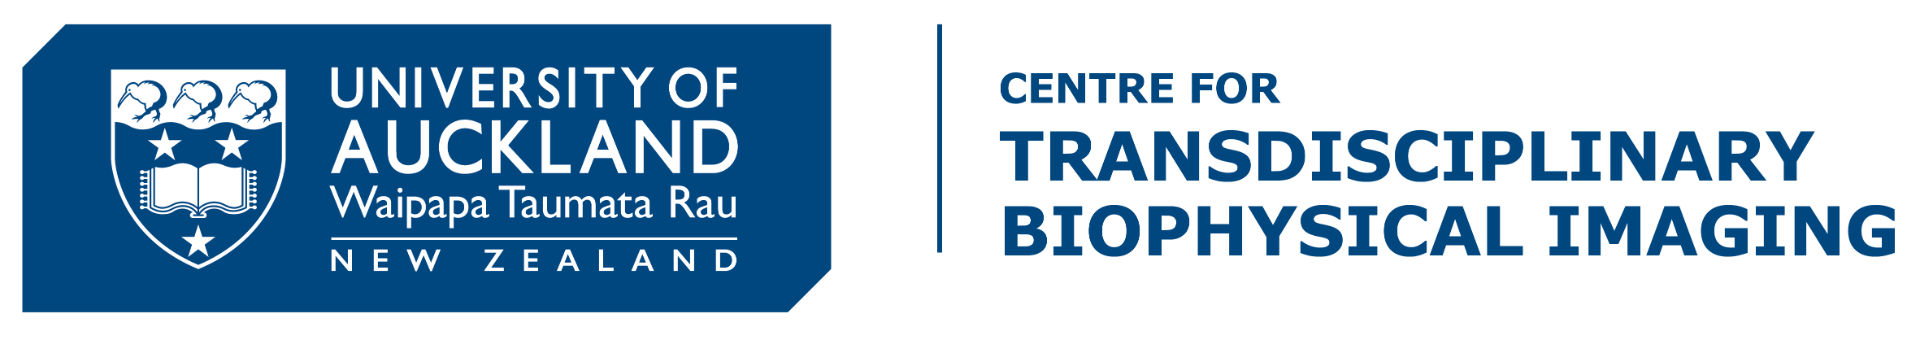 Centre for Transdisciplinary Biophysical Imaging